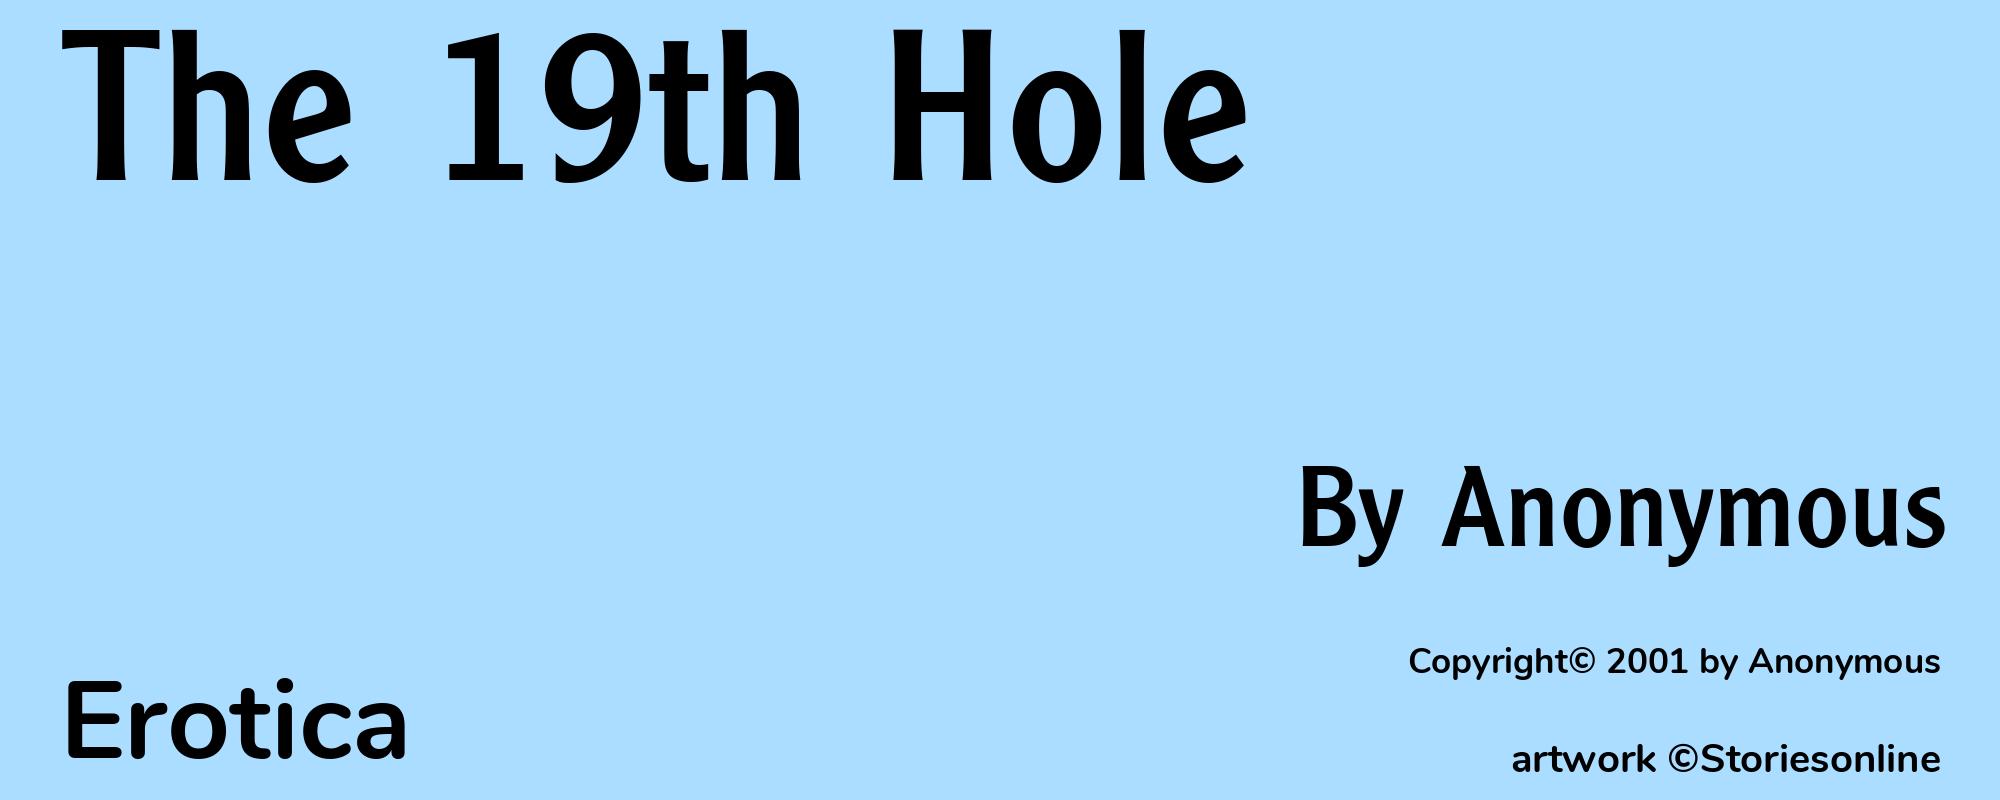 The 19th Hole - Cover